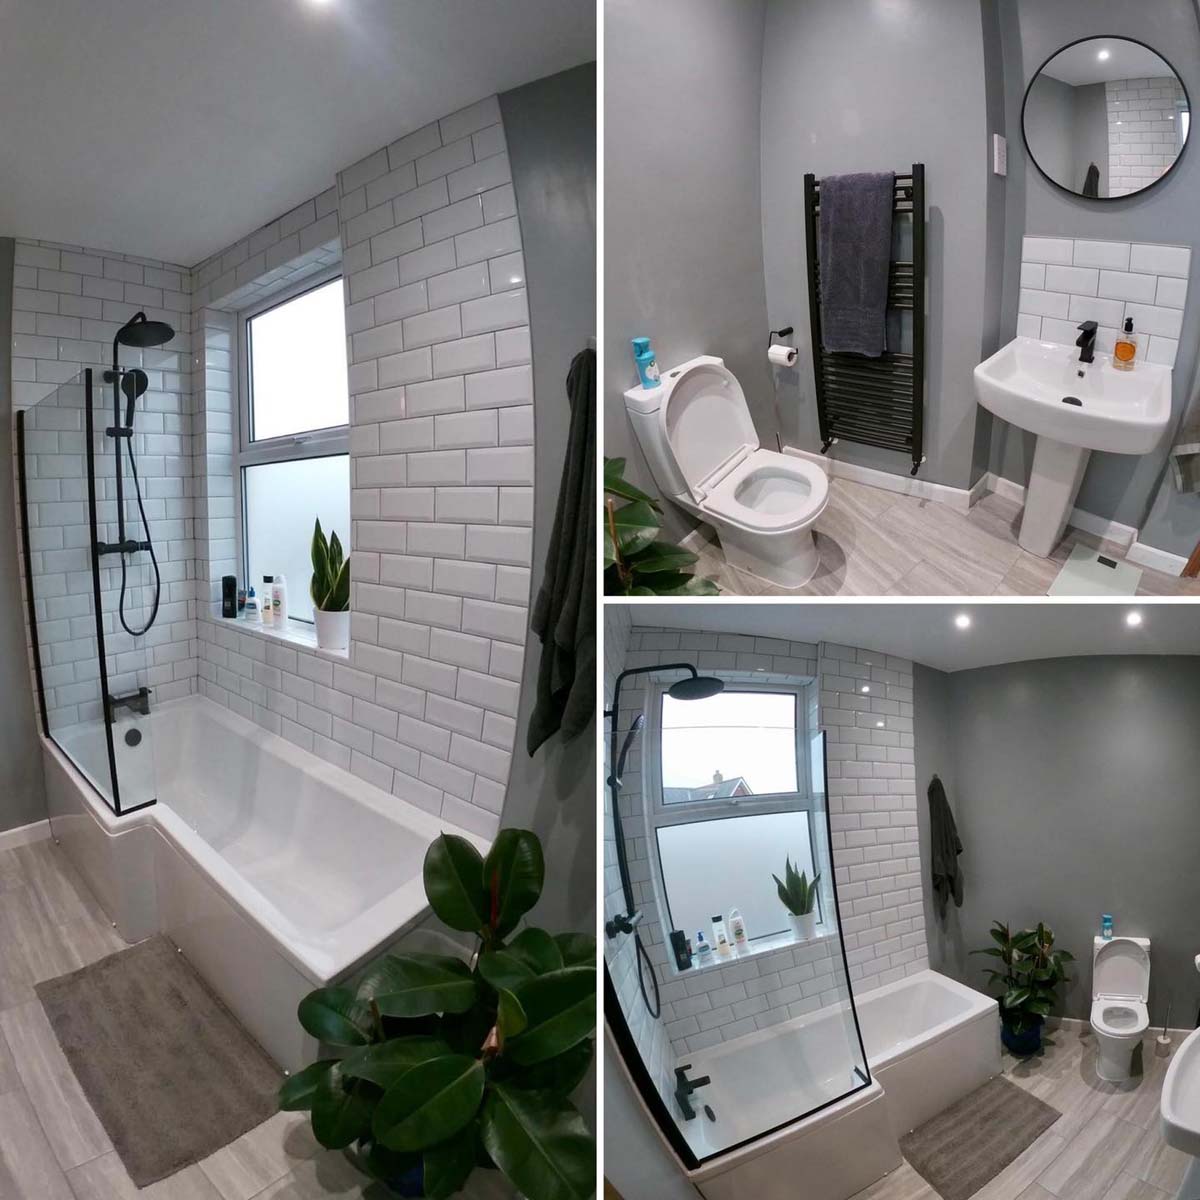 A modern bathroom with new toilet